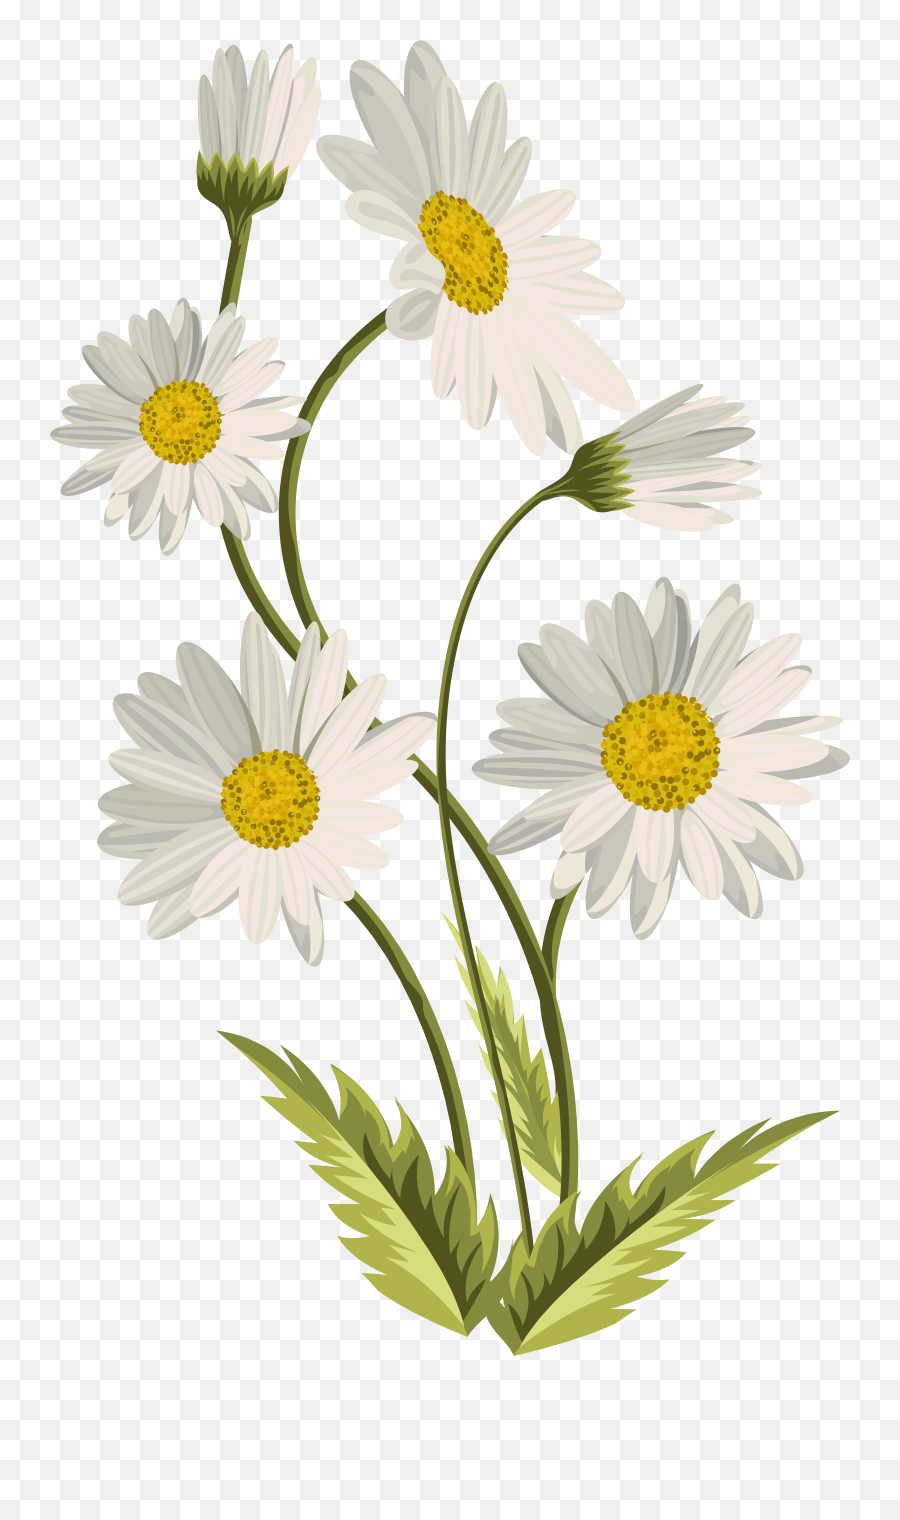 Daisies Clipart Download Free Clip Art - Transparent Daisy Flower Png Emoji,Daisy Clipart